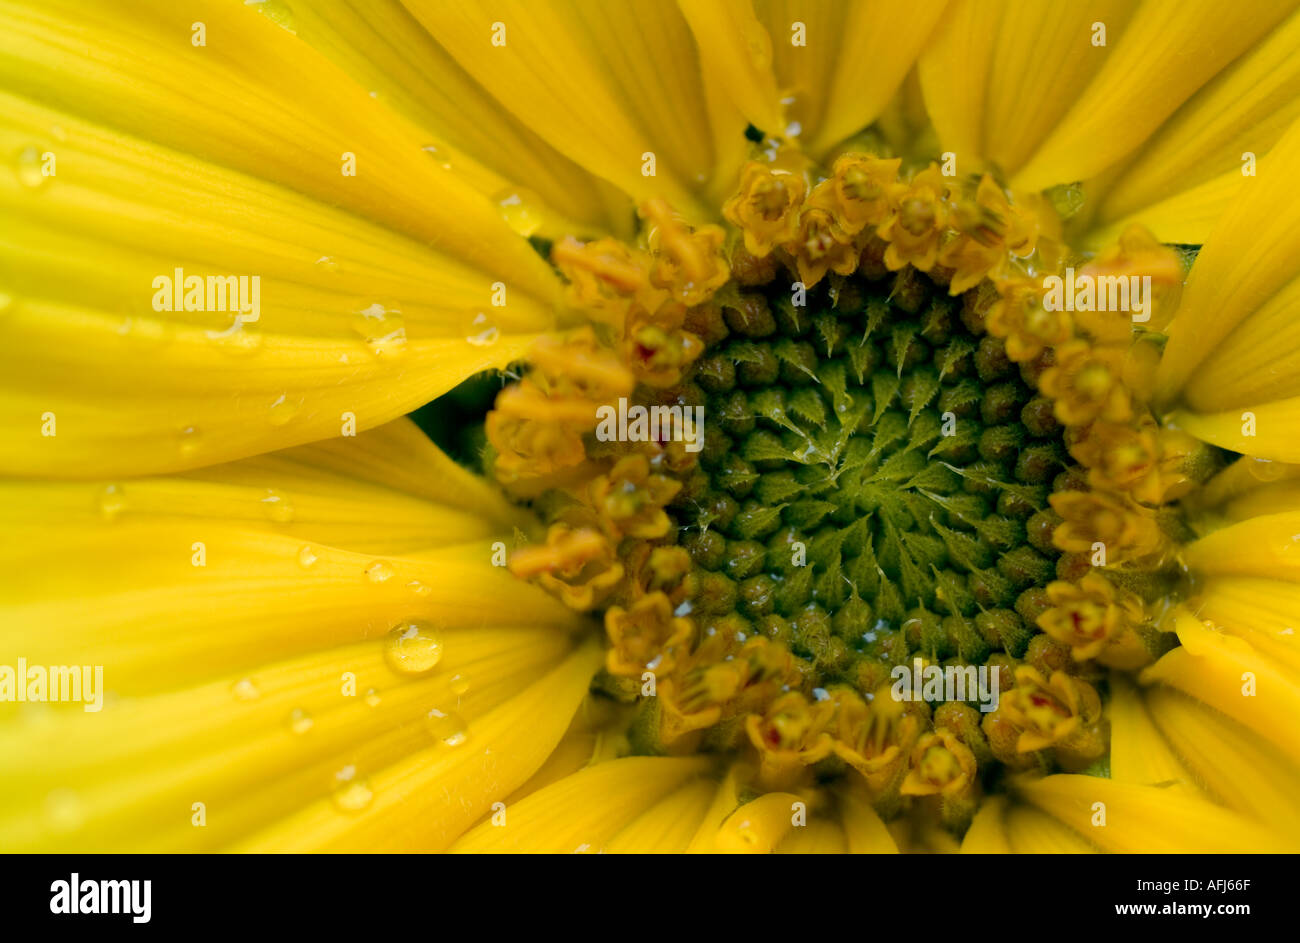 Detail of yellow Osteospernum flower with water droplets Stock Photo